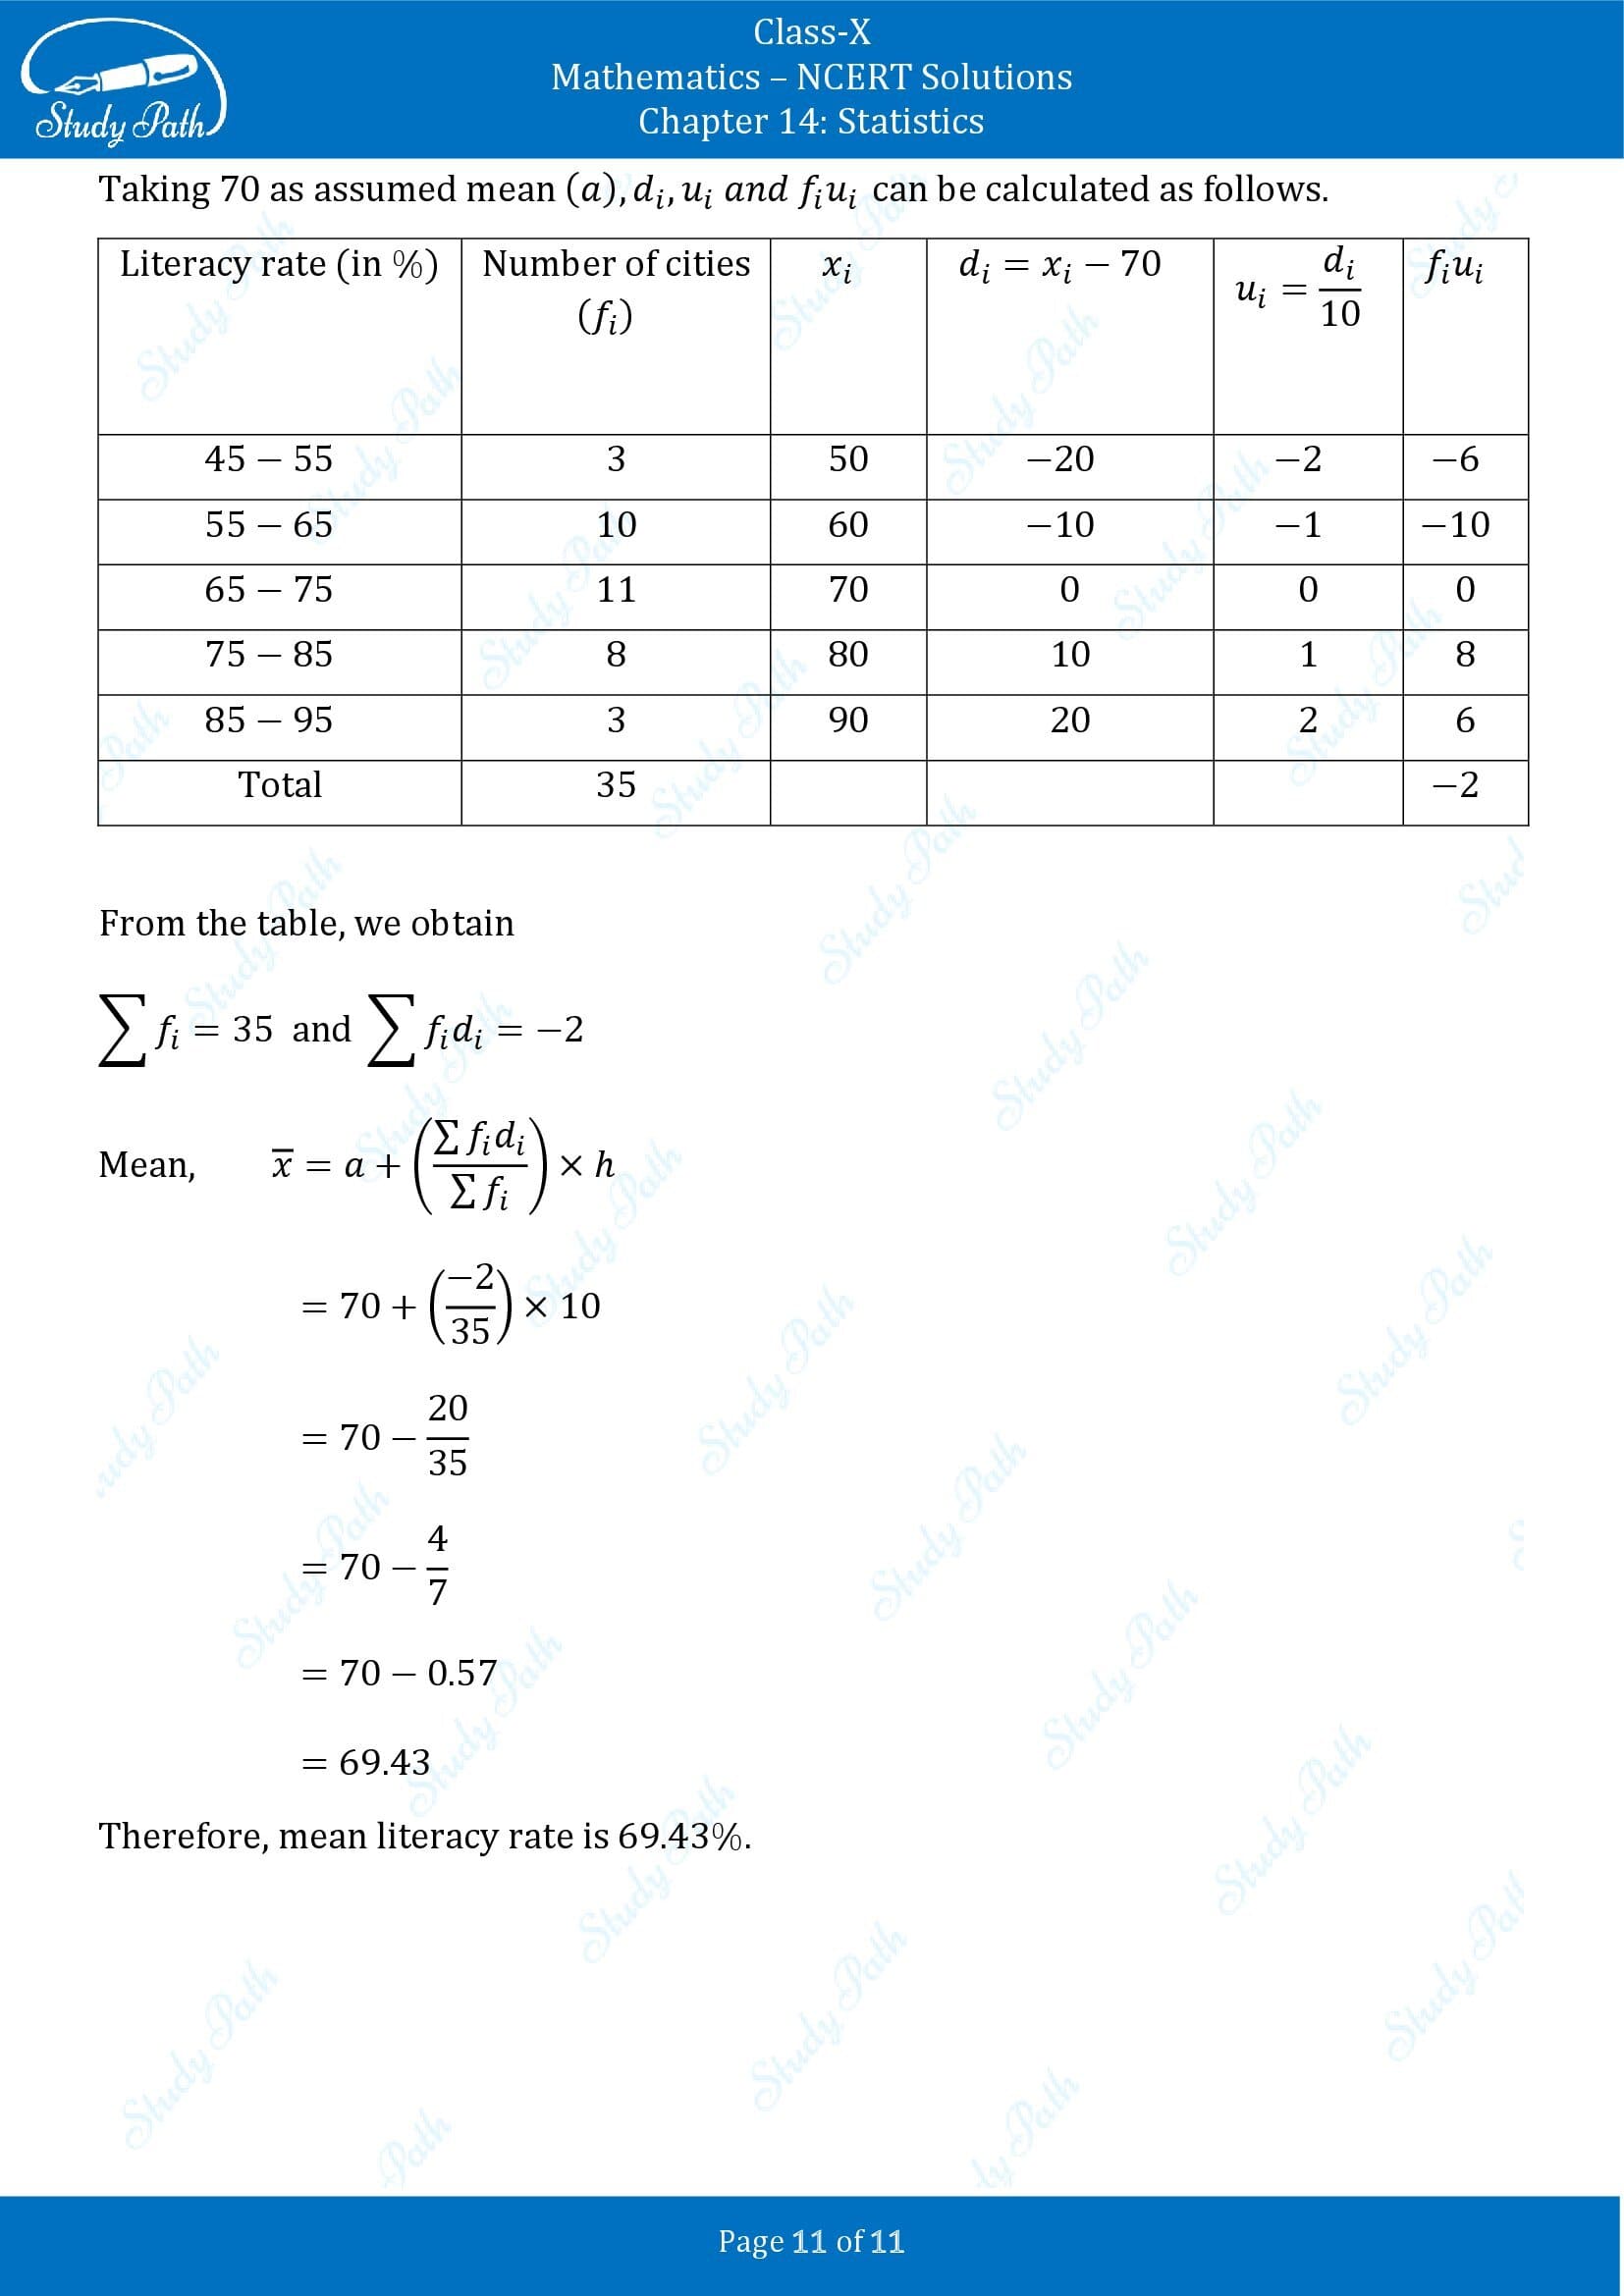 NCERT Solutions for Class 10 Maths Chapter 14 Statistics Exercise 14.1 00011